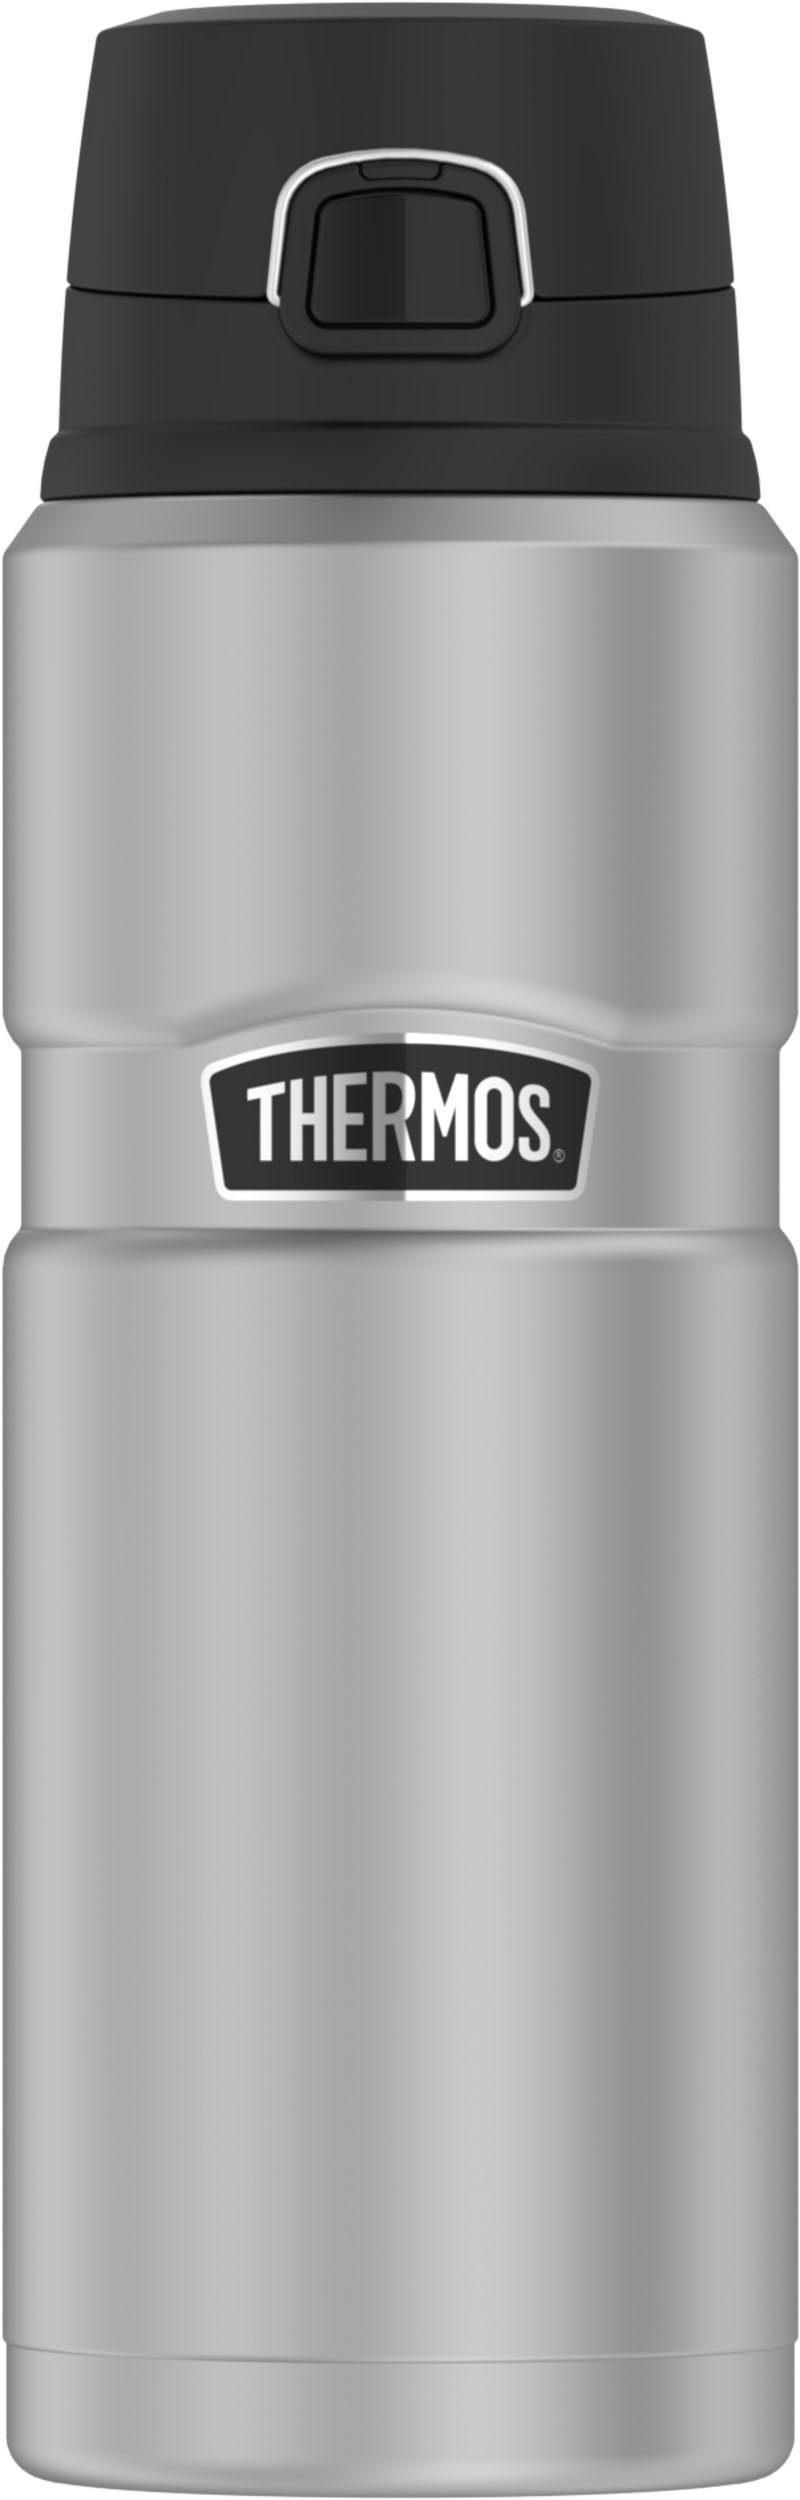 THERMOS Thermoflasche Stainless King, Edelstahl, 0,7 Liter